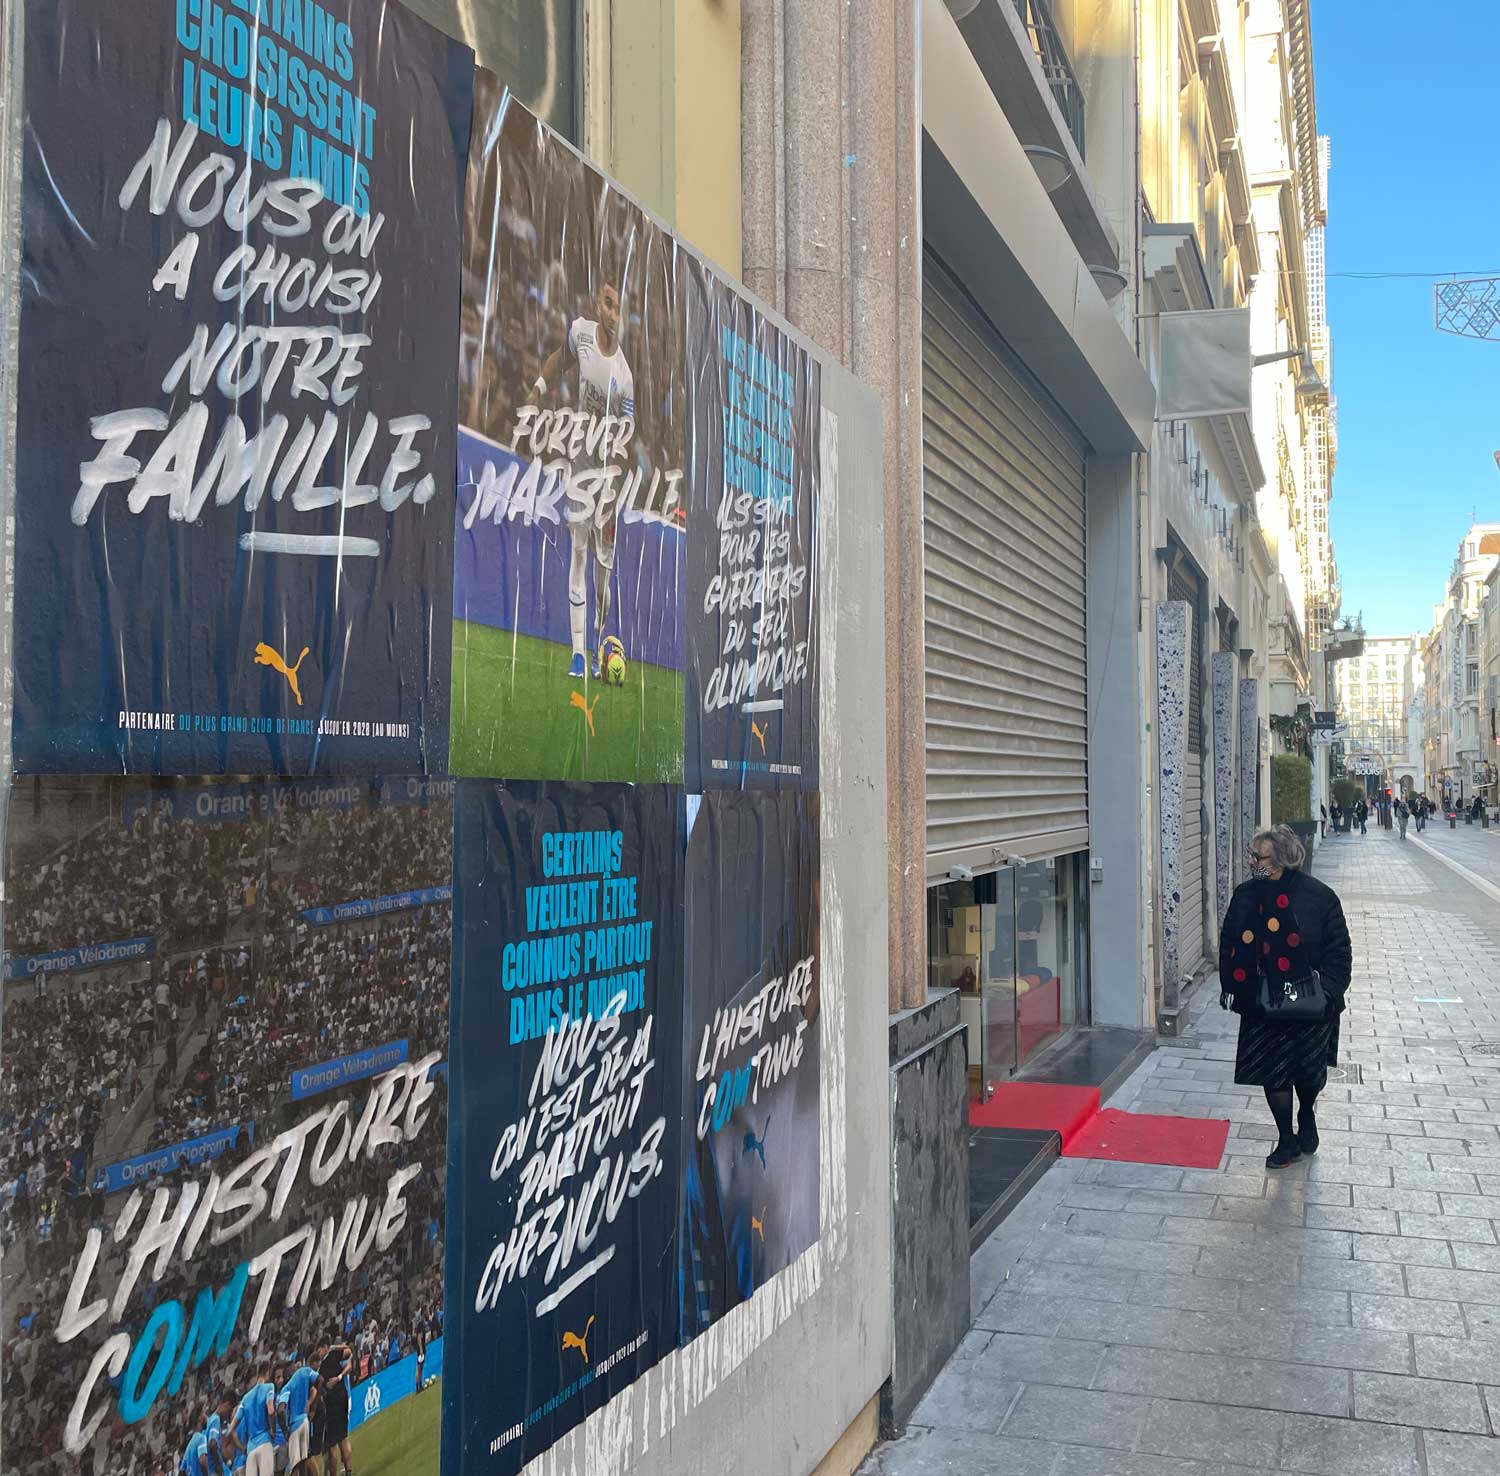 puma-om-affichage-sauvage-tapage-medias-street-guerilla-marketing-campagne-publicitaire-france